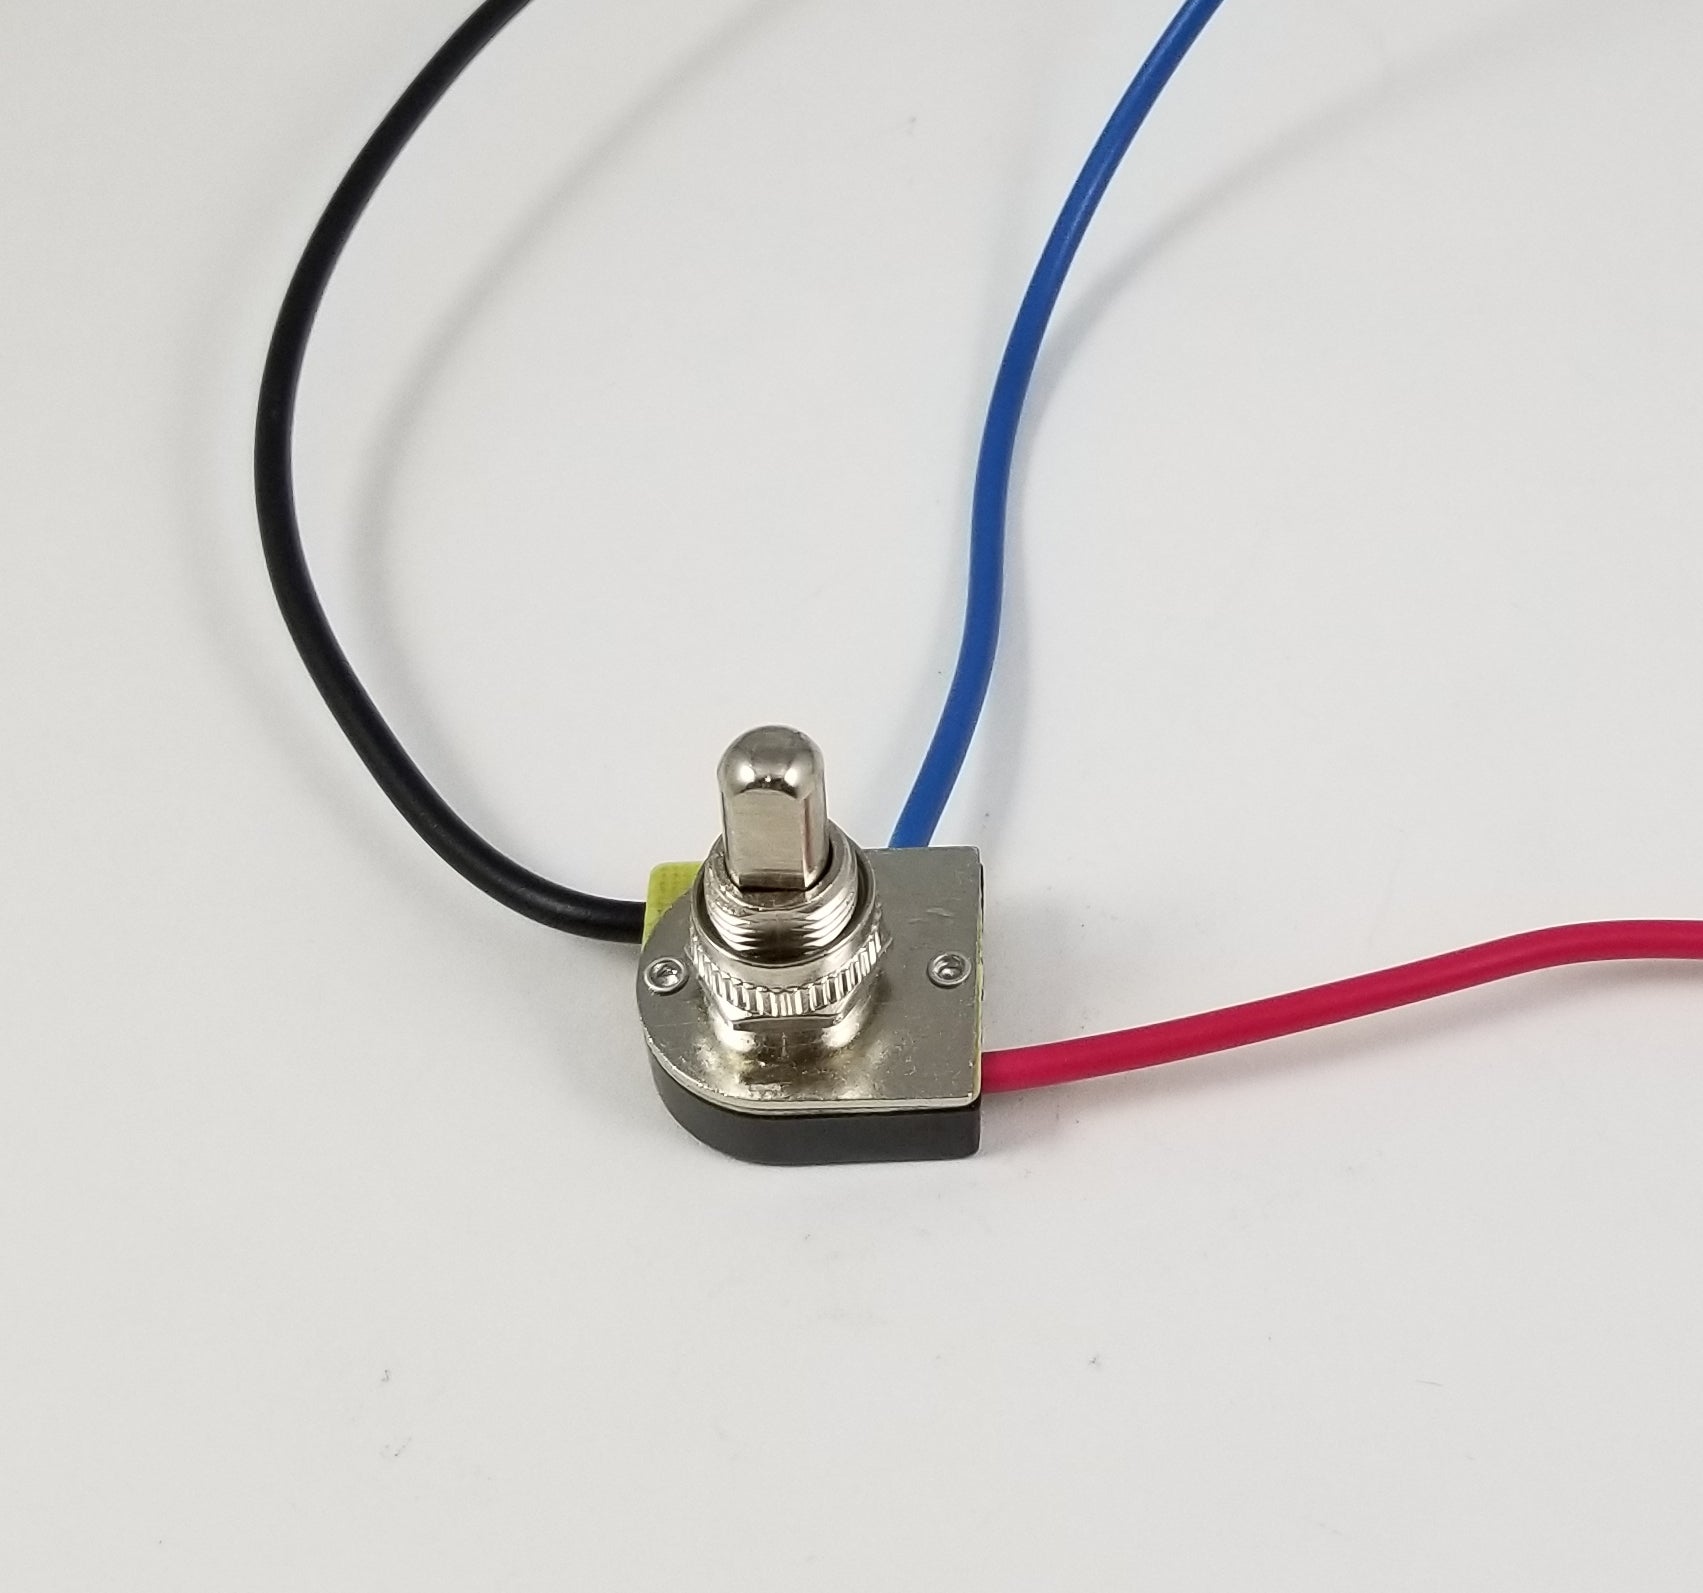 How to Wire a Push Button Switch